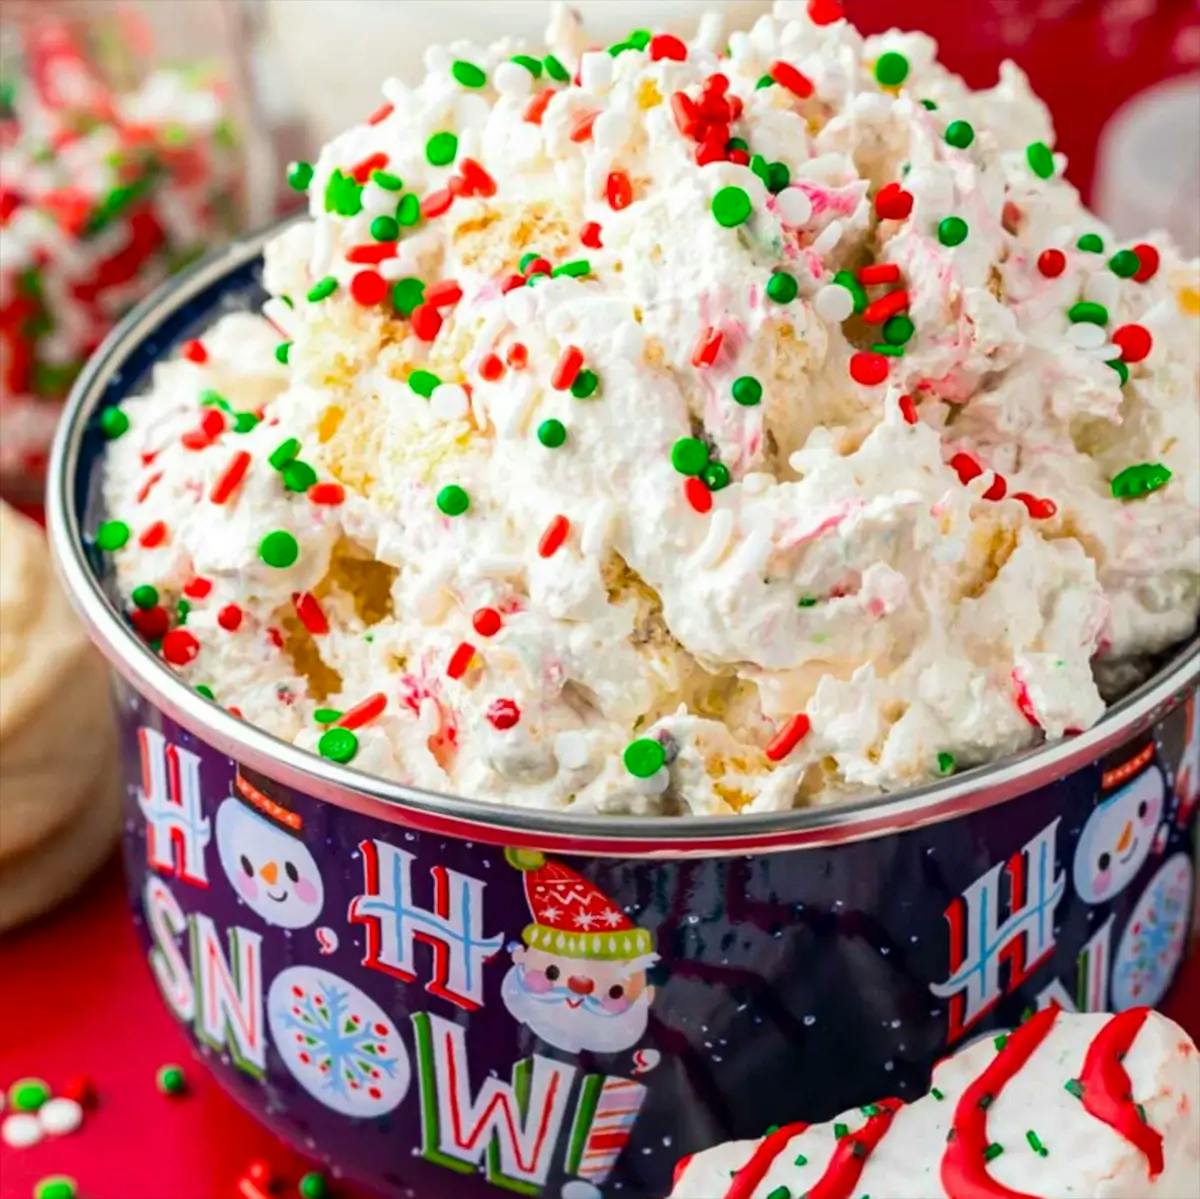 Little Debbie Christmas Tree Cake Dip, from a recipe by Little Sunny Kitchen.